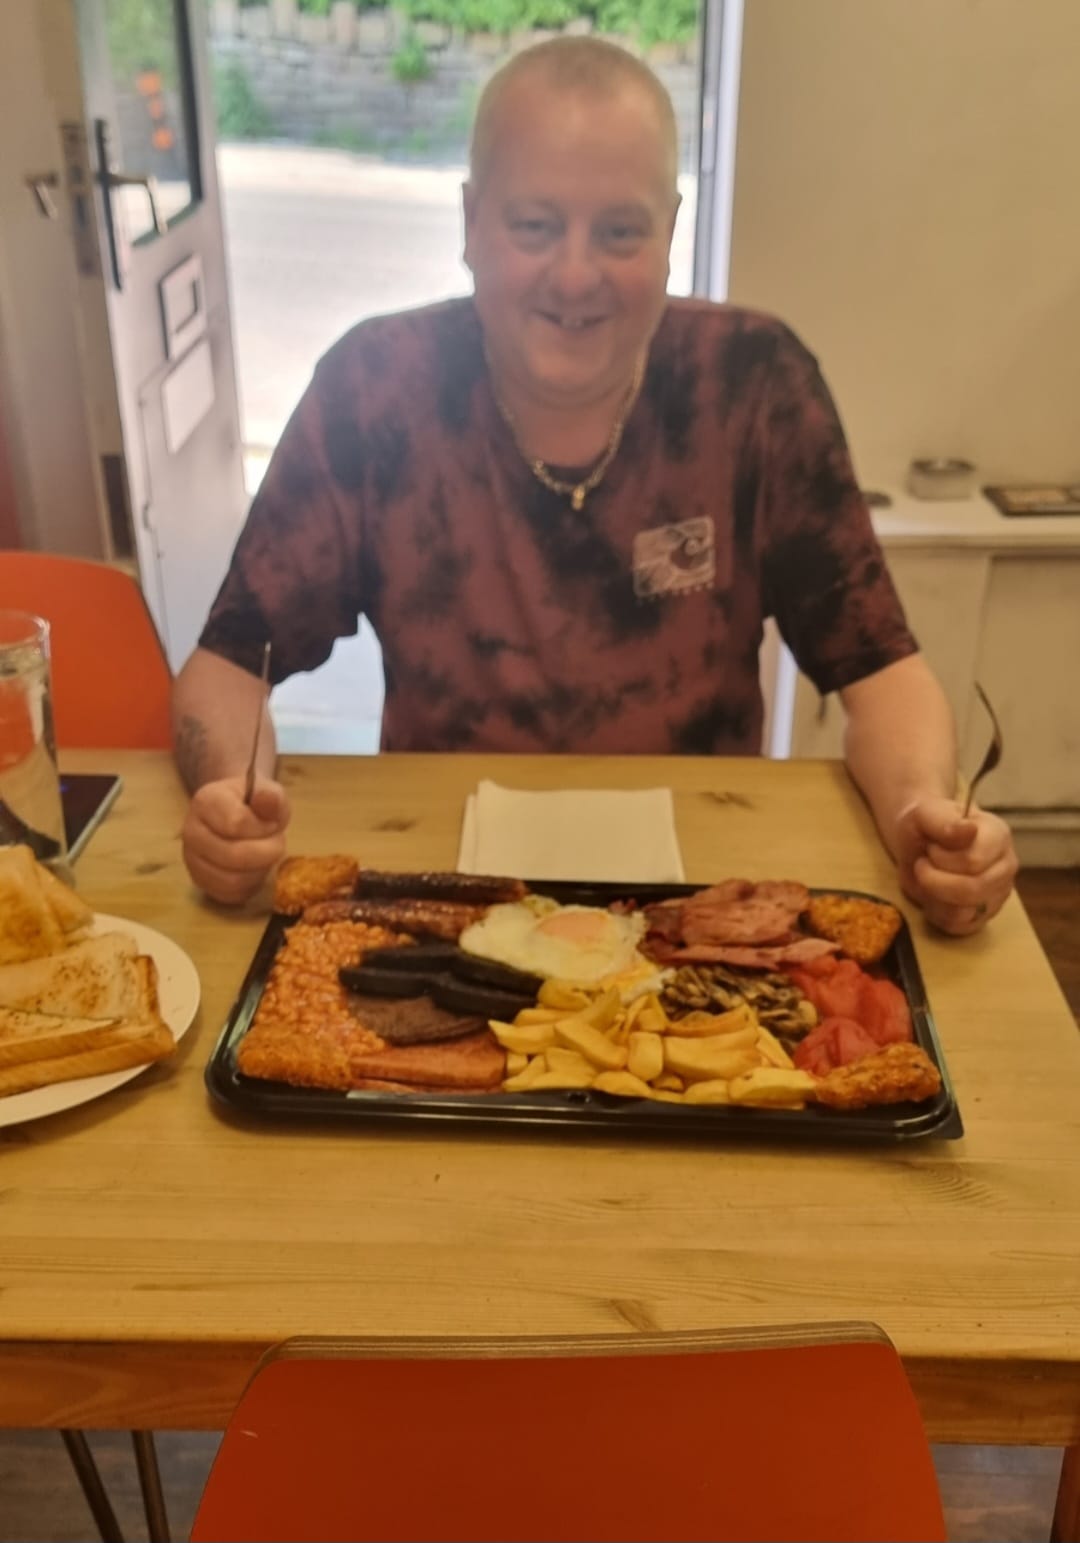 A customer in Bury trying the full english challenge